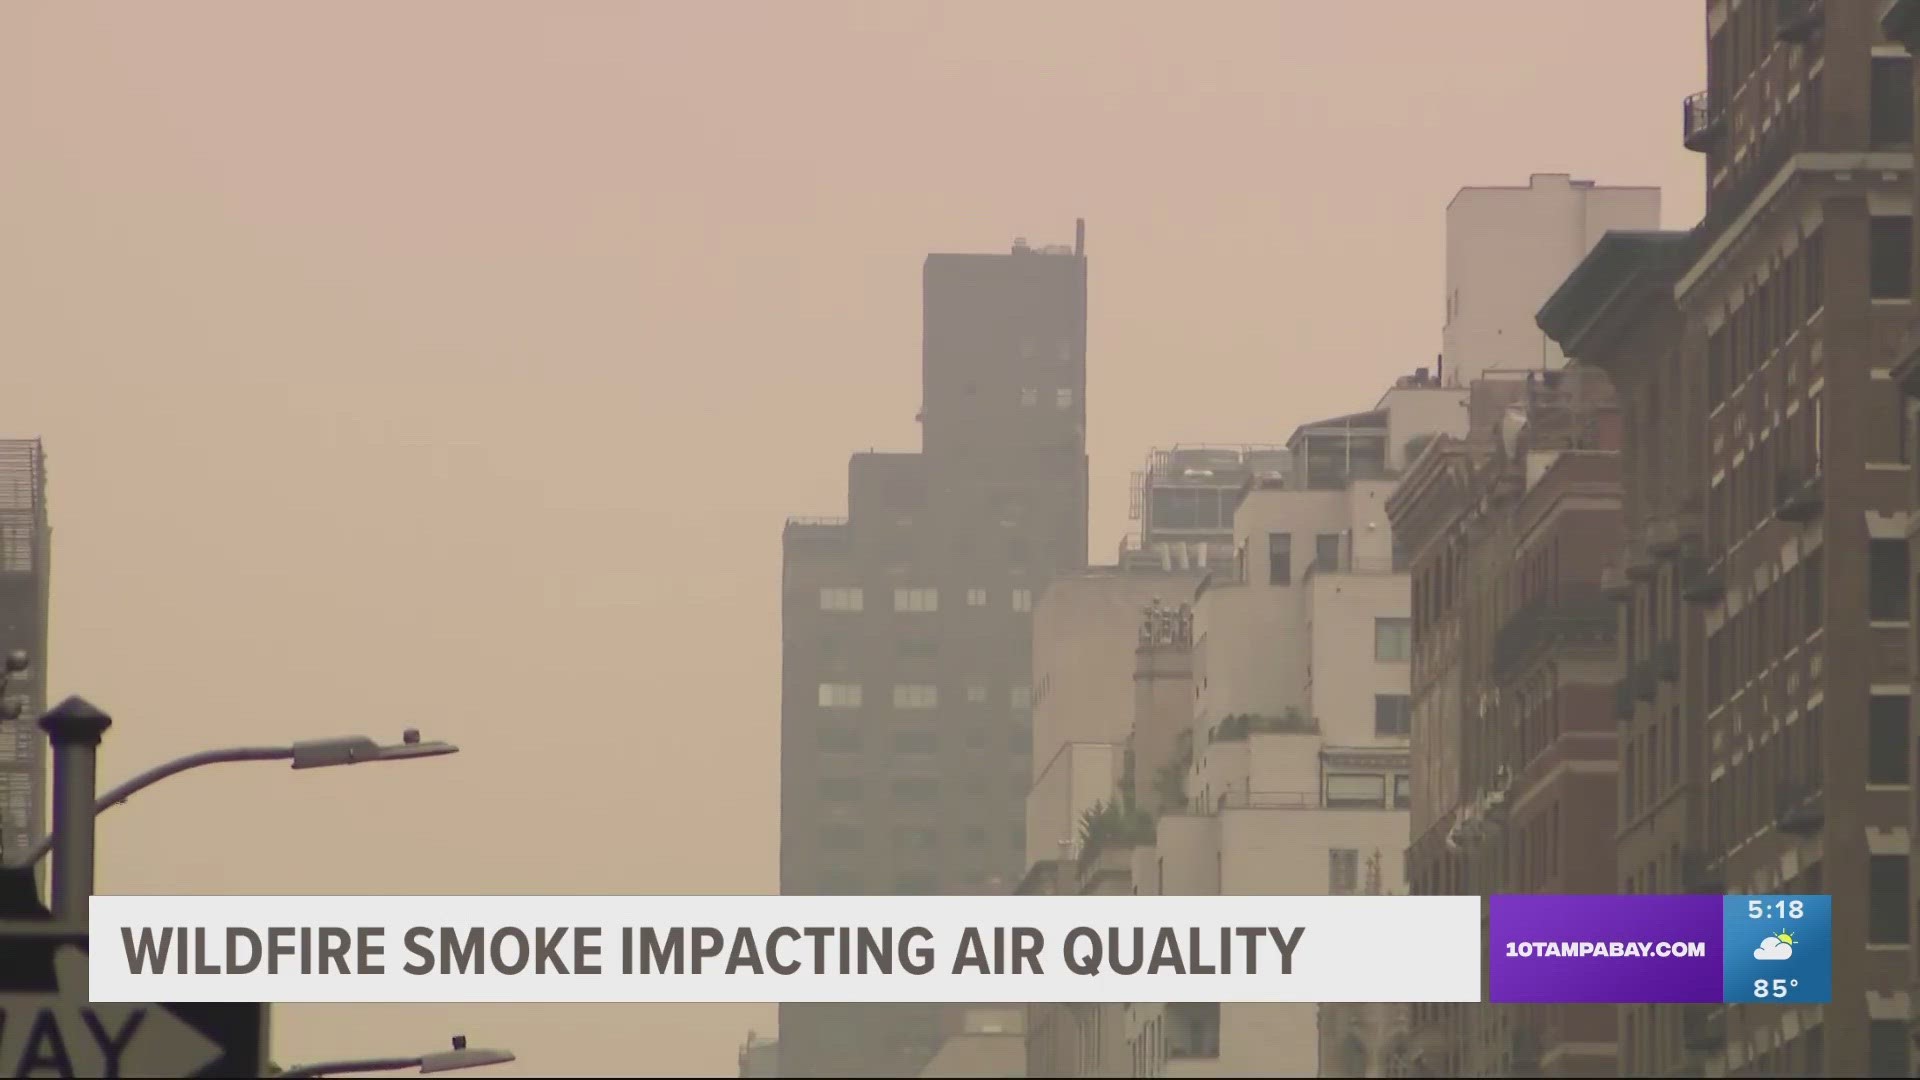 The haze prompted a ground stop in New York City's LaGuardia Airport and a ground delay in Newark International Airport.